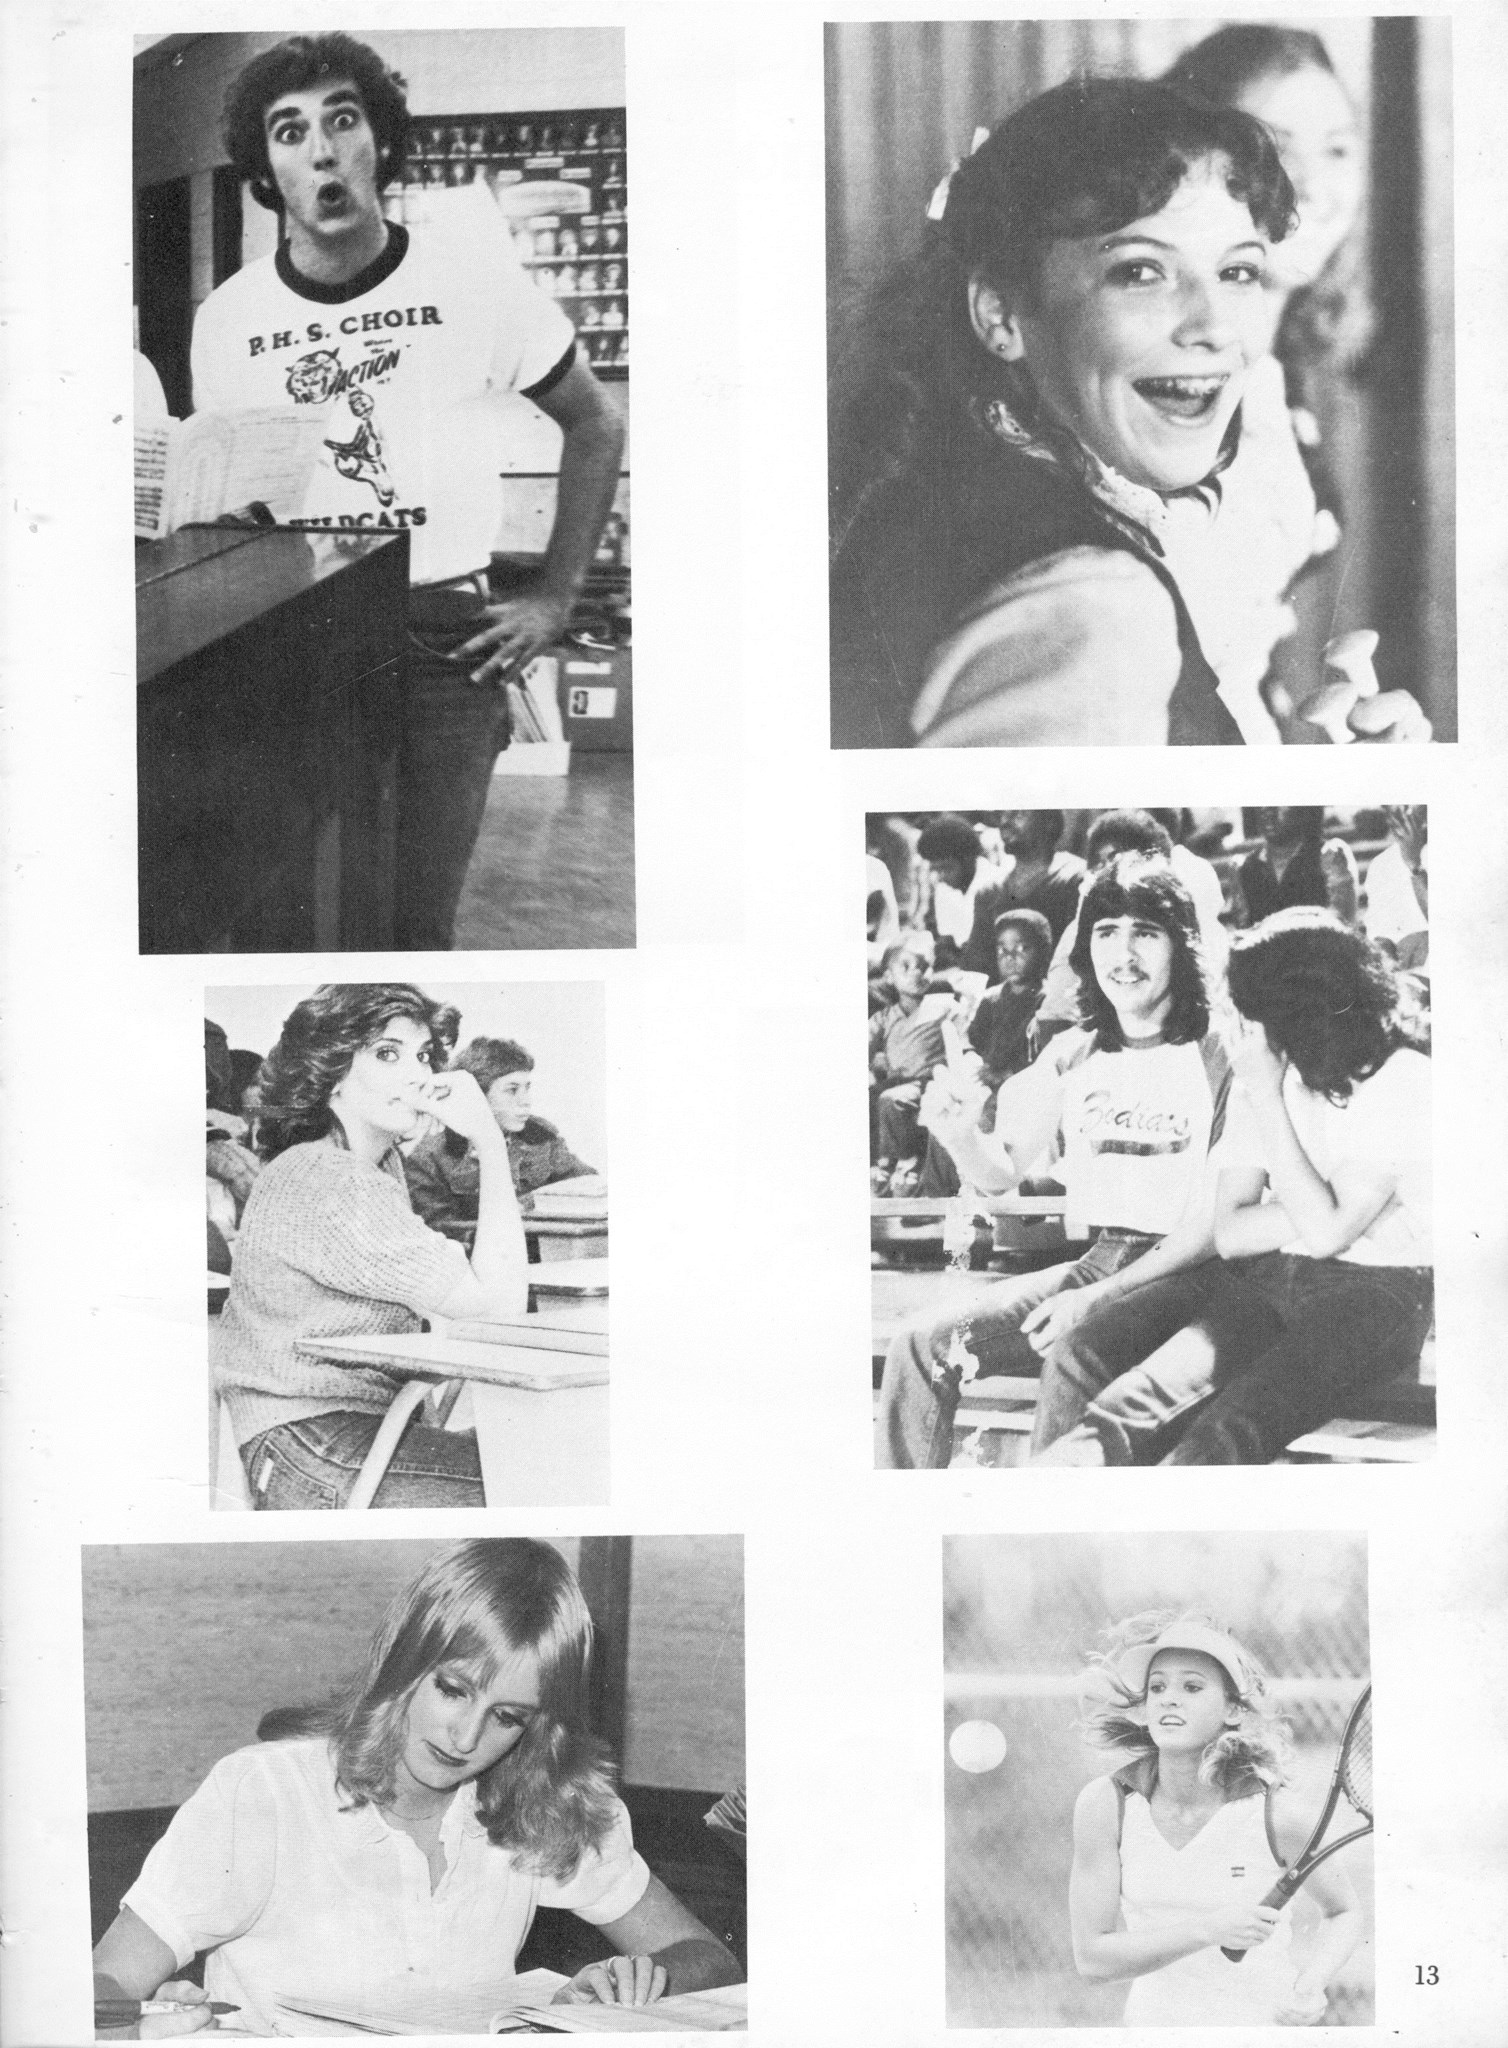 ../../../Images/Large/1982/Arclight-1982-pg0013.jpg